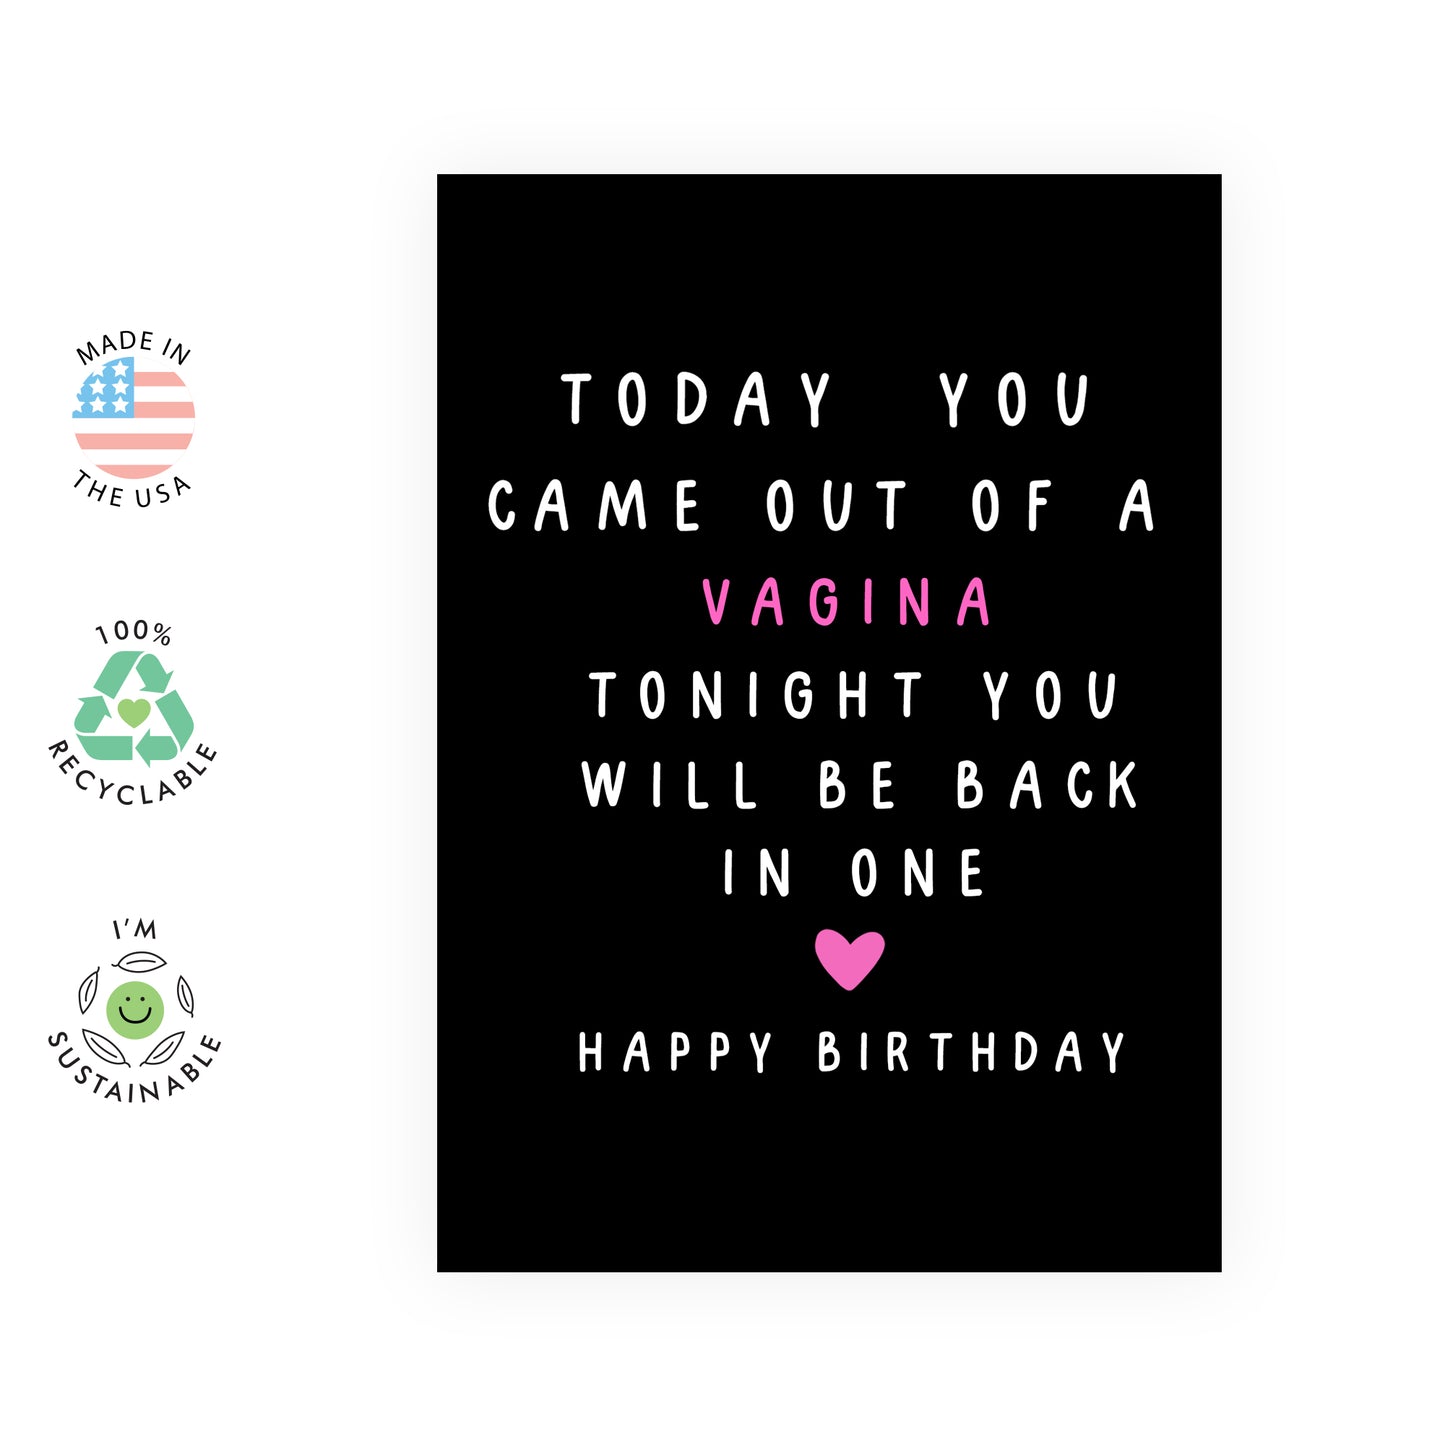 Funny Birthday Card - Today You Came Out Of A V*gina - For Men Boyfriend Husband